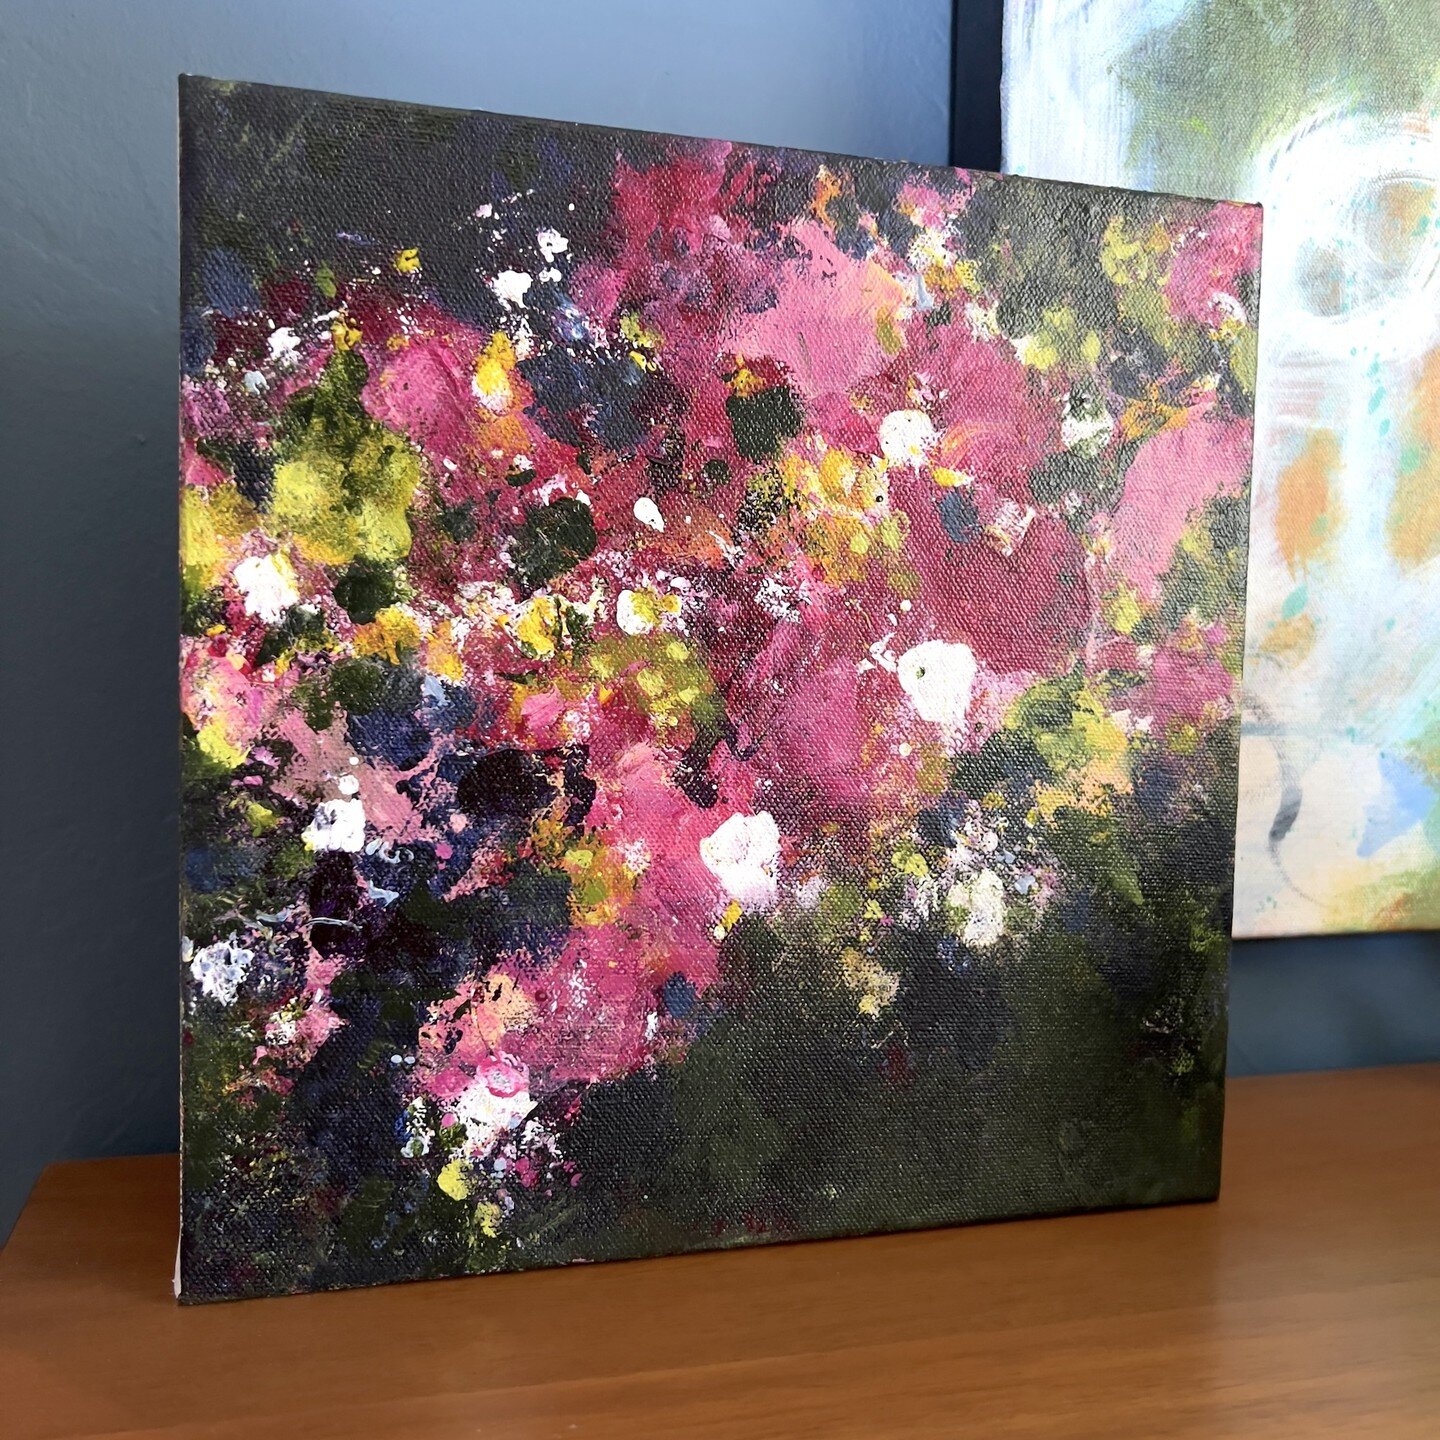 🩷 NEW PAINTING! A visual explosion of creativity, hope, and freedom! From the rich colors of pink, green, and blue to the playful paint splatters, every element of this painting inspires the imagination and encourages you to dream big!

Just imagine